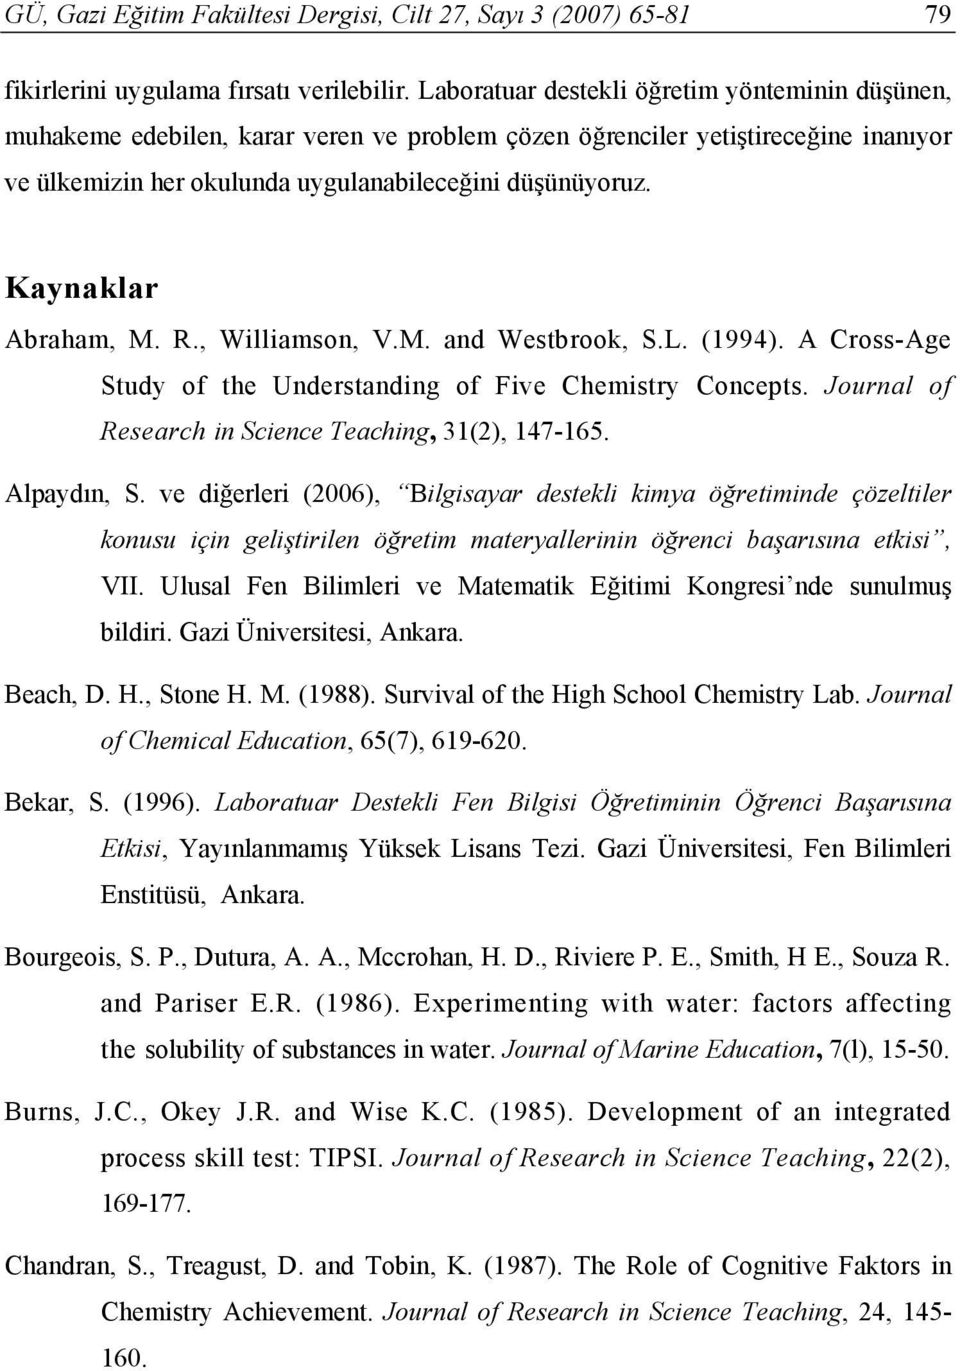 Kaynaklar Abraham, M. R., Williamson, V.M. and Westbrook, S.L. (1994). A Cross-Age Study of the Understanding of Five Chemistry Concepts. Journal of Research in Science Teaching, 31(2), 147-165.